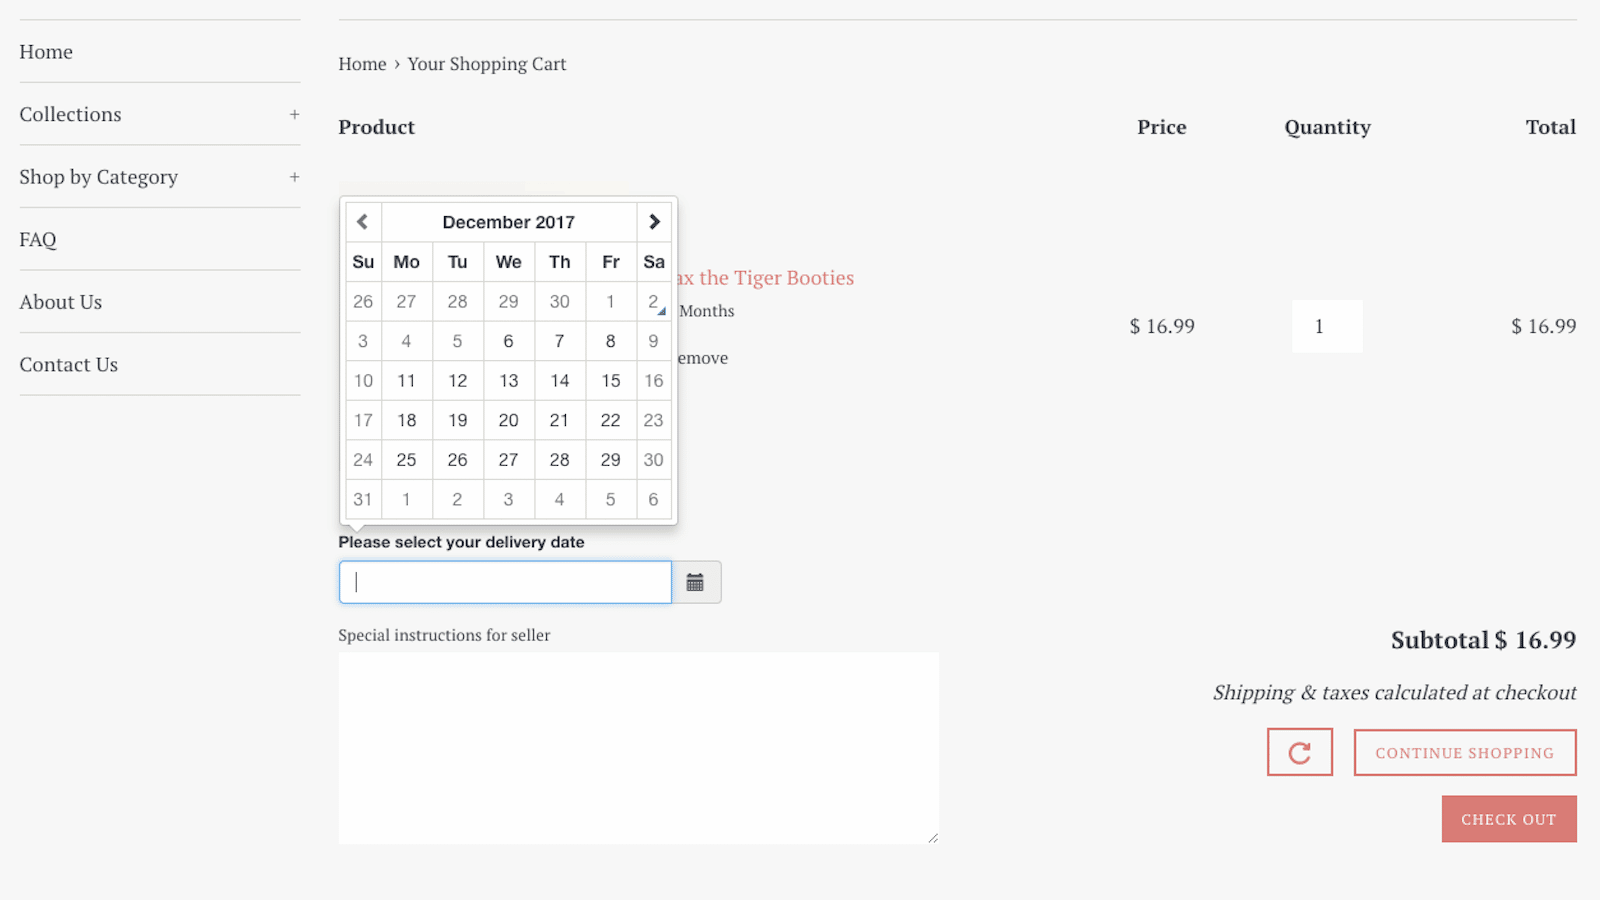 1‑Click Delivery Date Picker